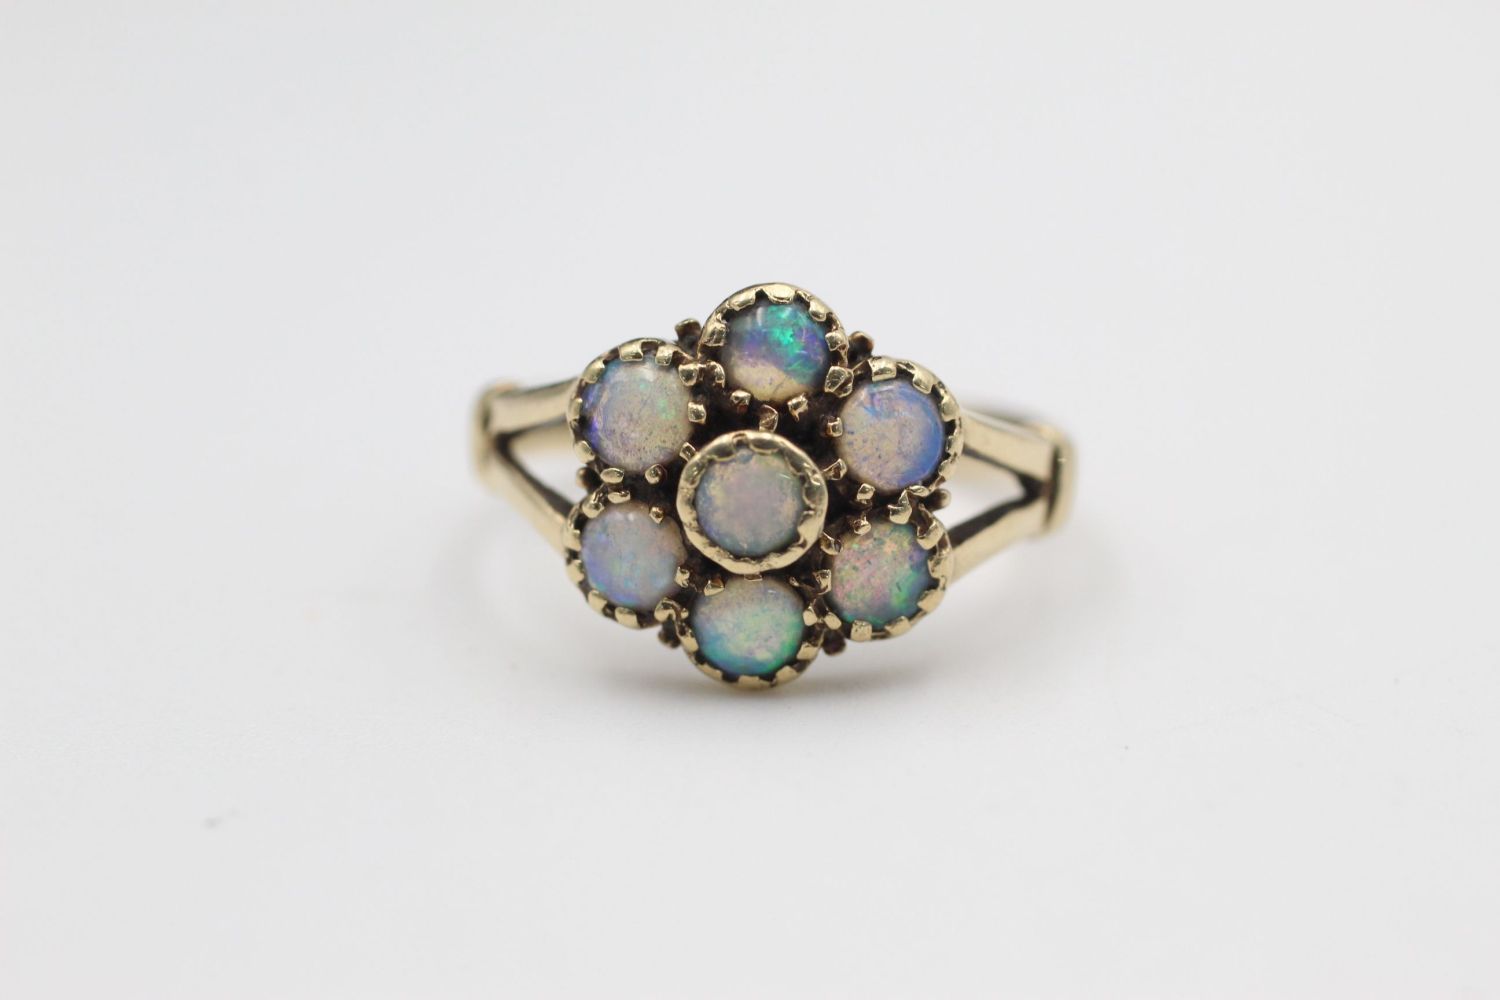 9ct Gold opal cluster ring 2.8 grams gross